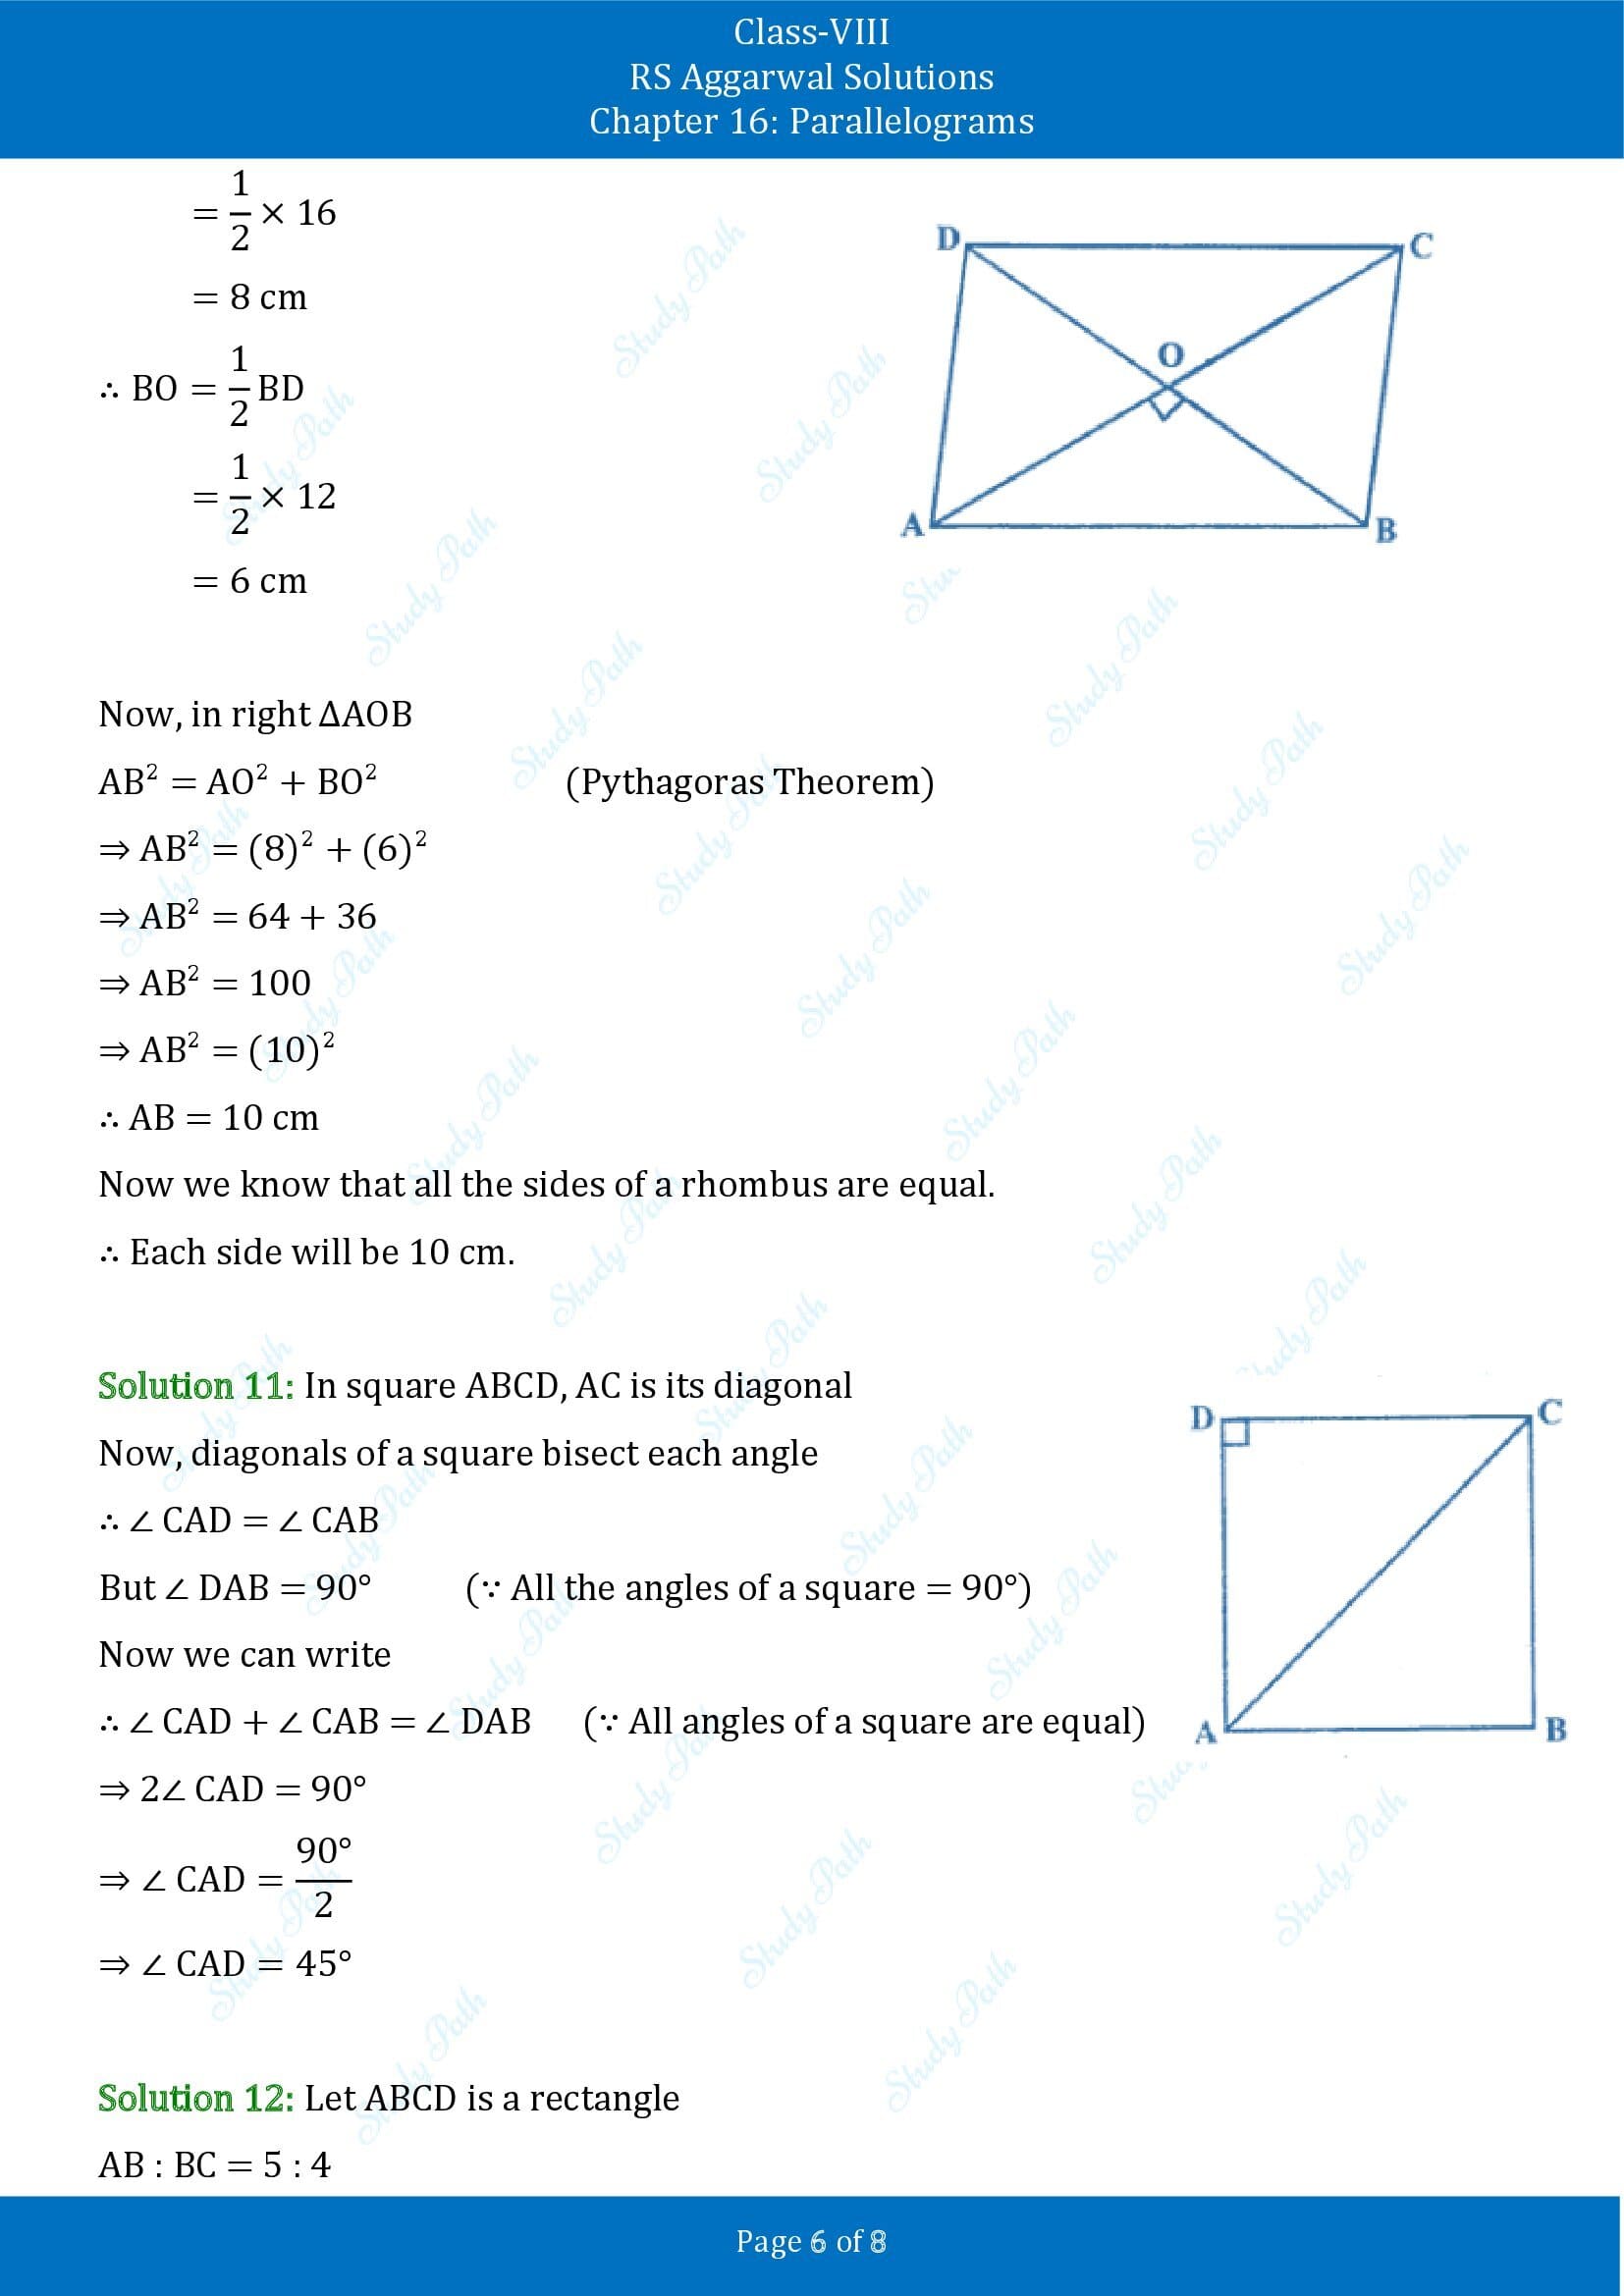 RS Aggarwal Solutions Class 8 Chapter 16 Parallelograms Exercise 16A 00006